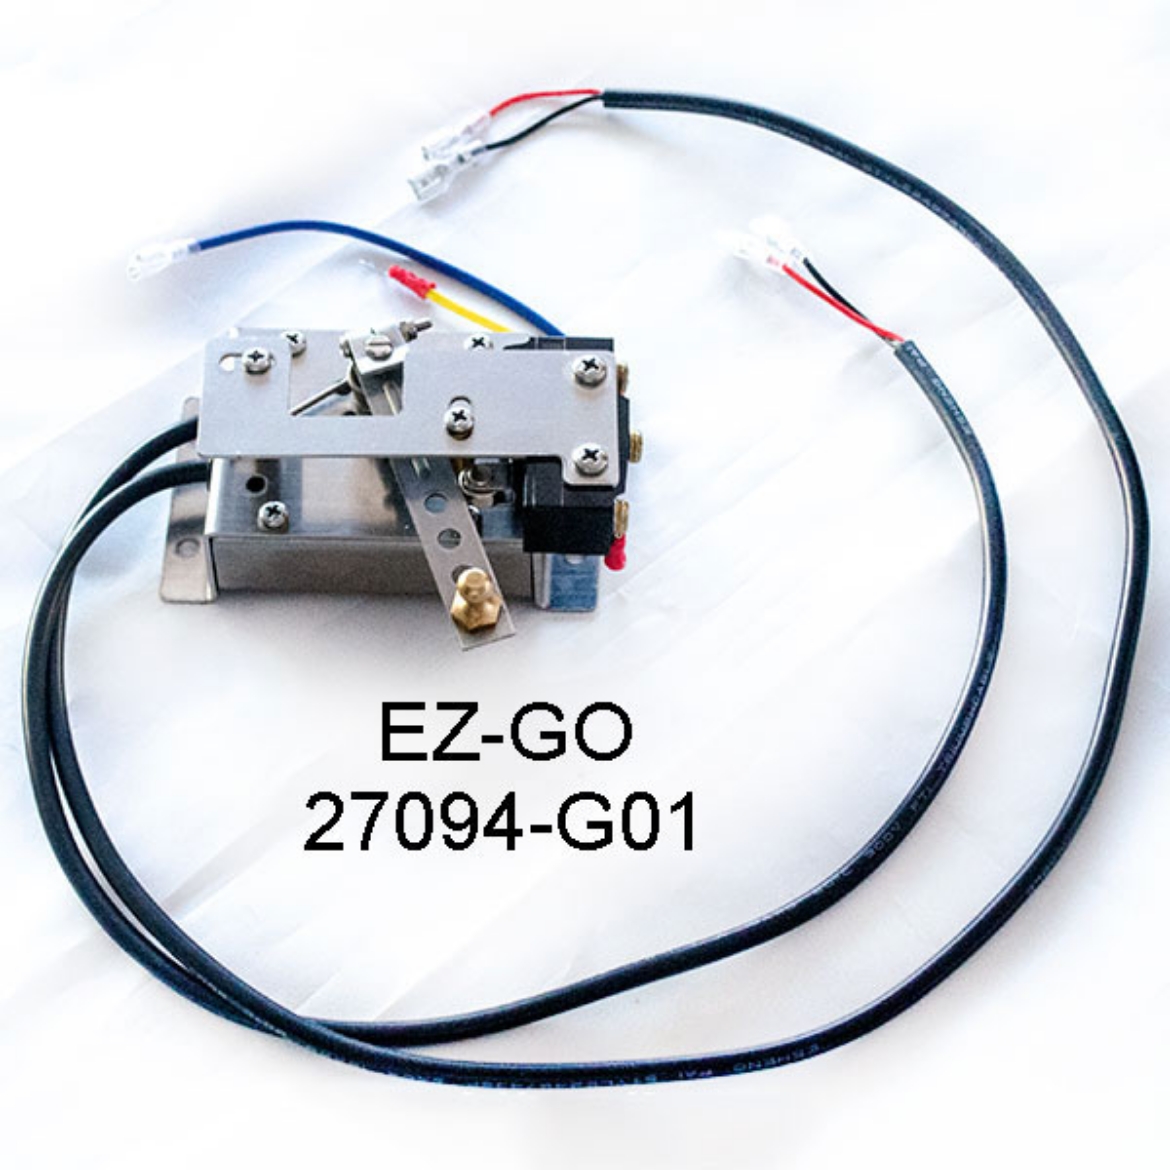 Picture of EZGO MARATHON ELECTRIC POTENTIOMETER ASSEMBLY YEARS 1989-1994